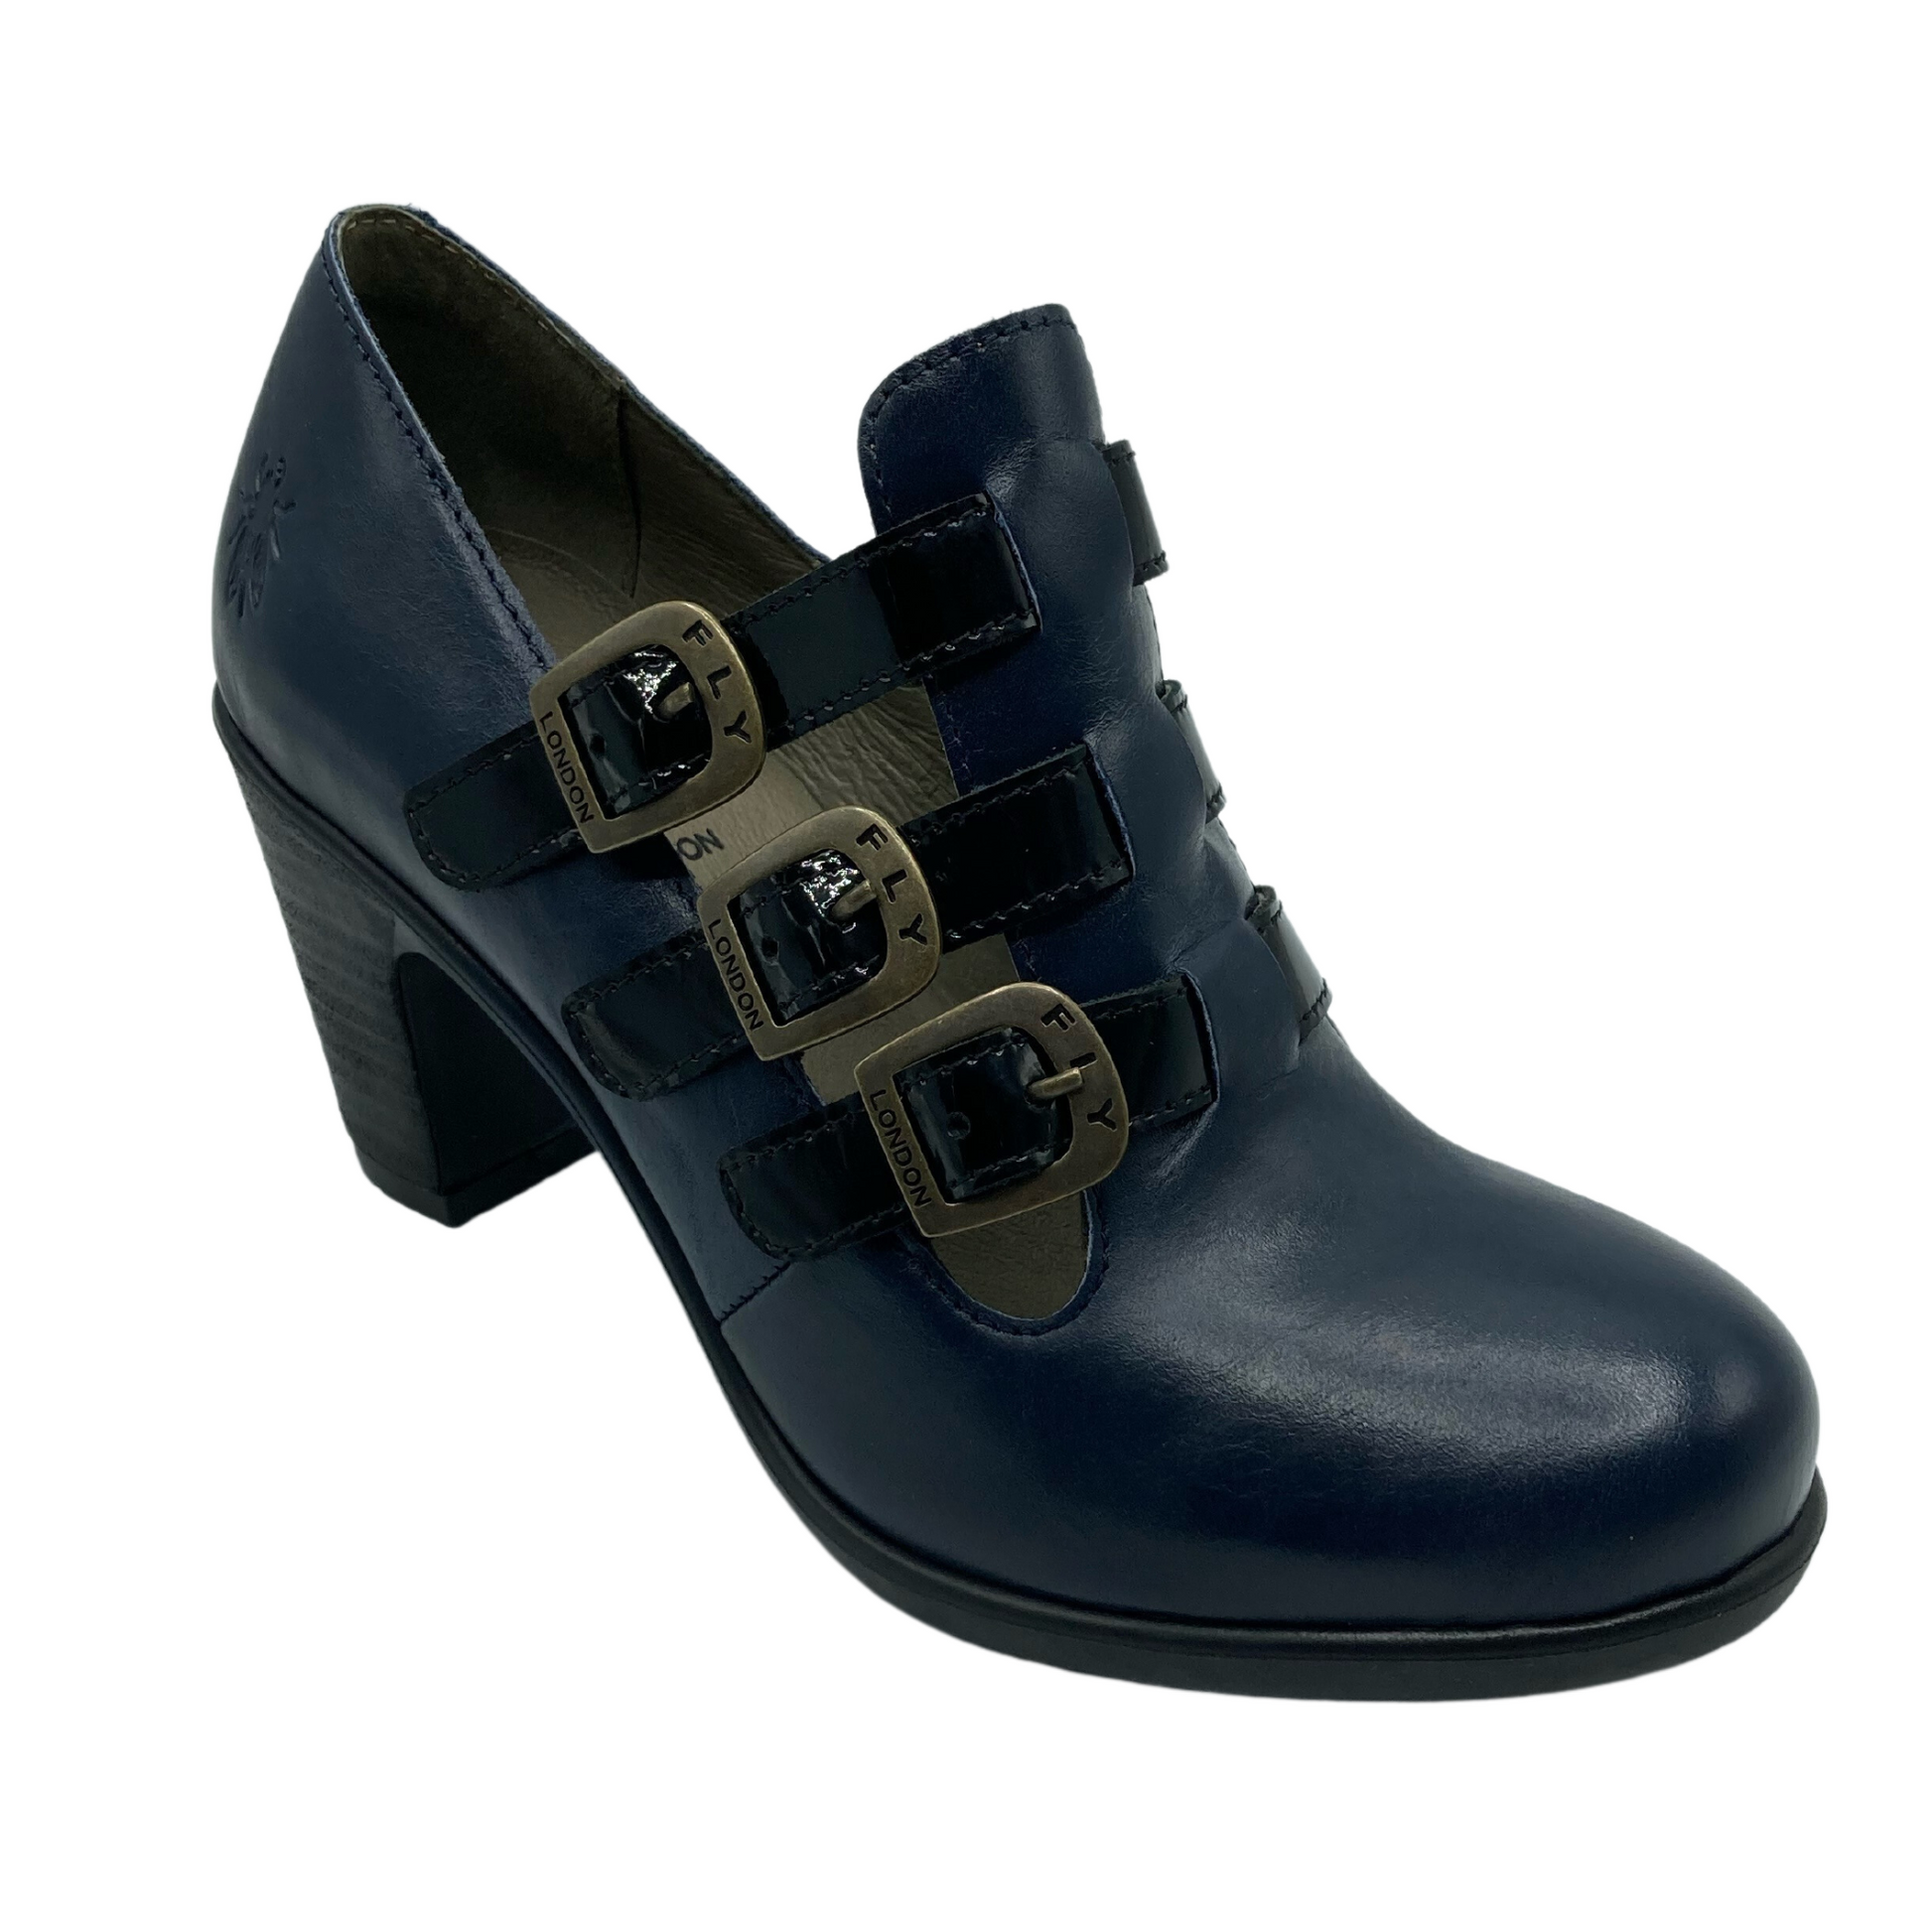 45 degree angled view of navy leather heels with 3 buckle detail and rounded toe